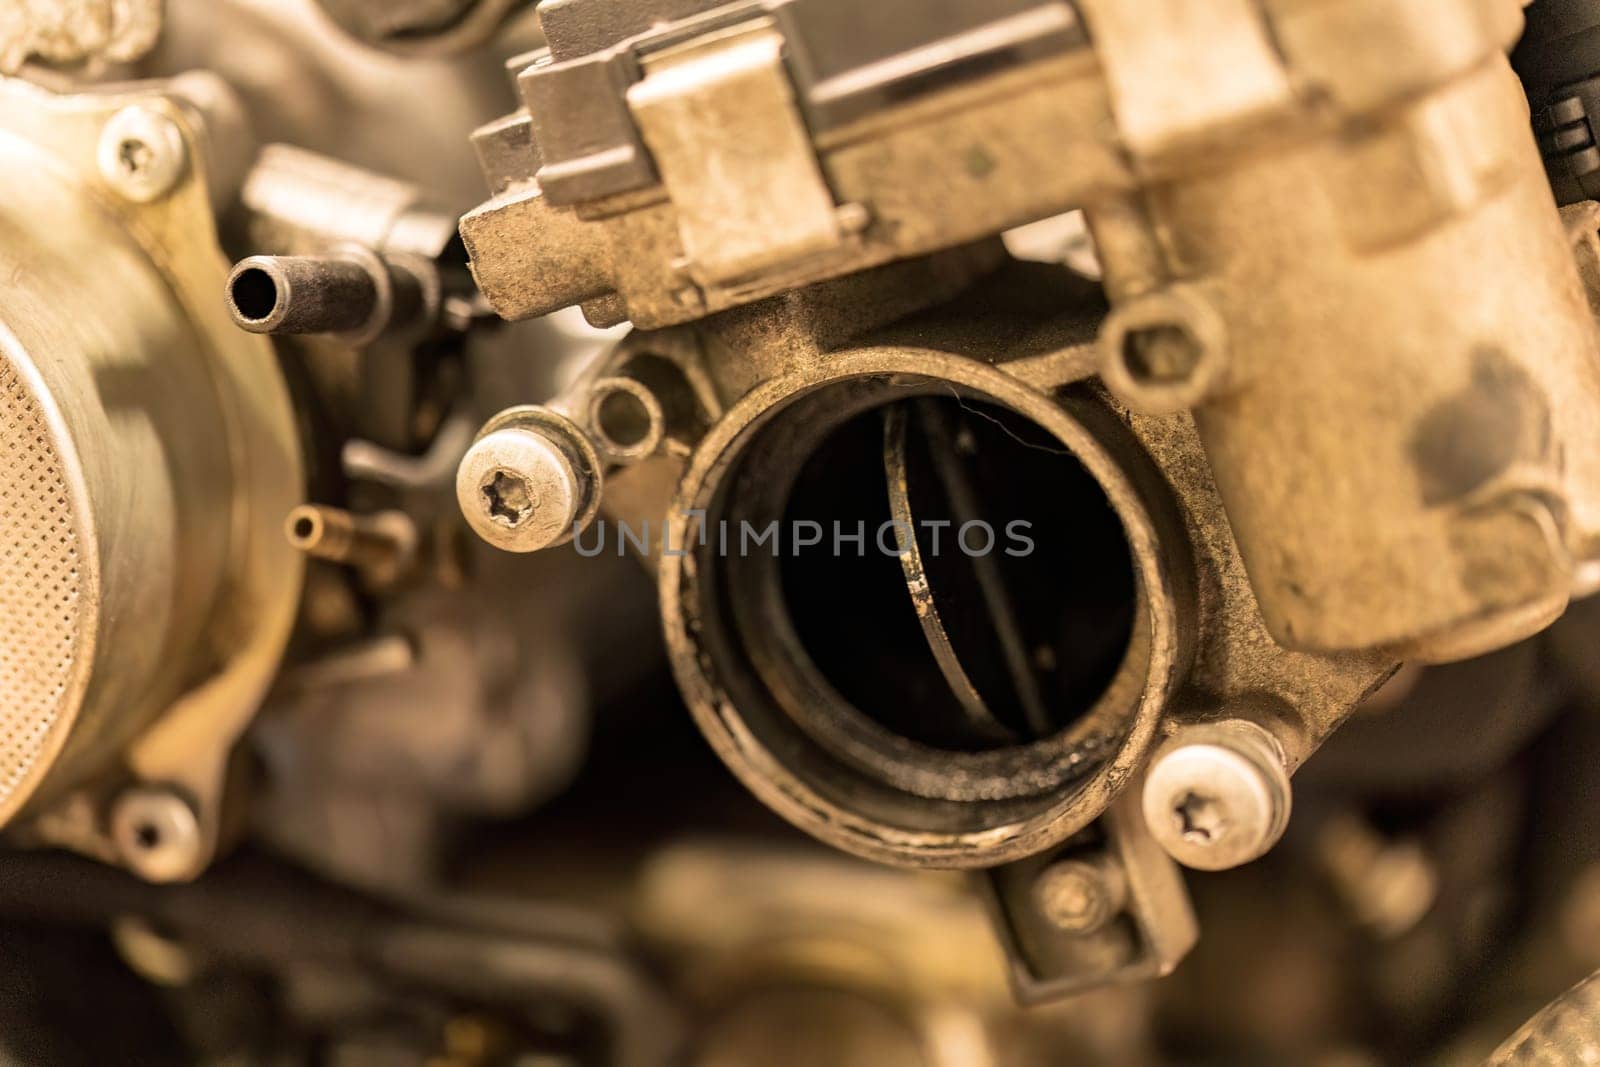 A photo capturing the gritty details of a dirty throttle valve within a car engine, showcasing wear.